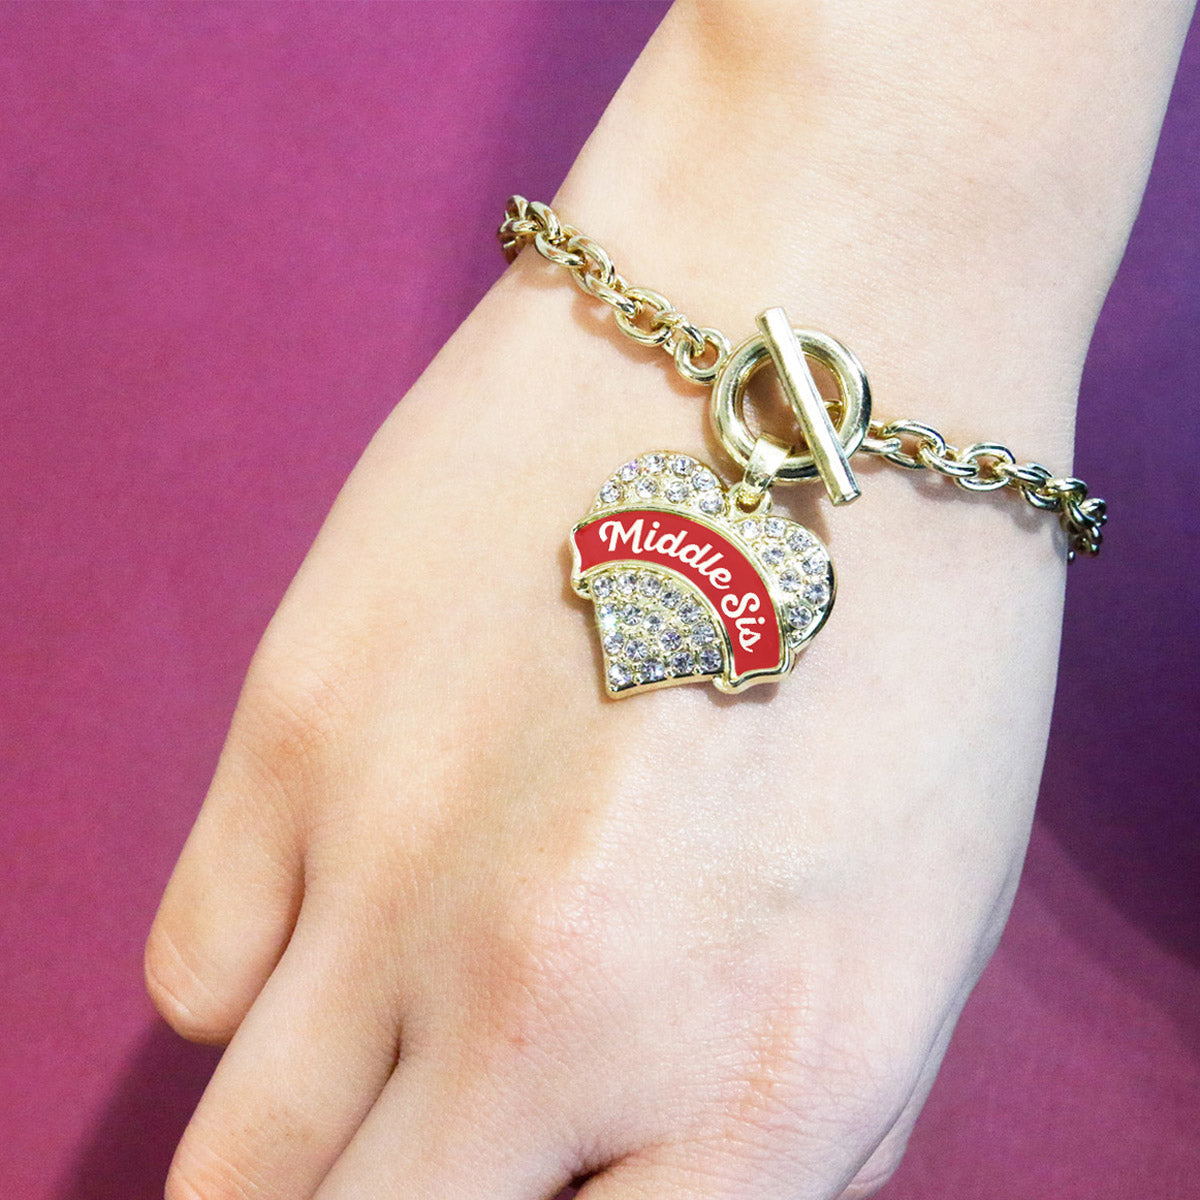 Gold Red Middle Sister Pave Heart Charm Toggle Bracelet